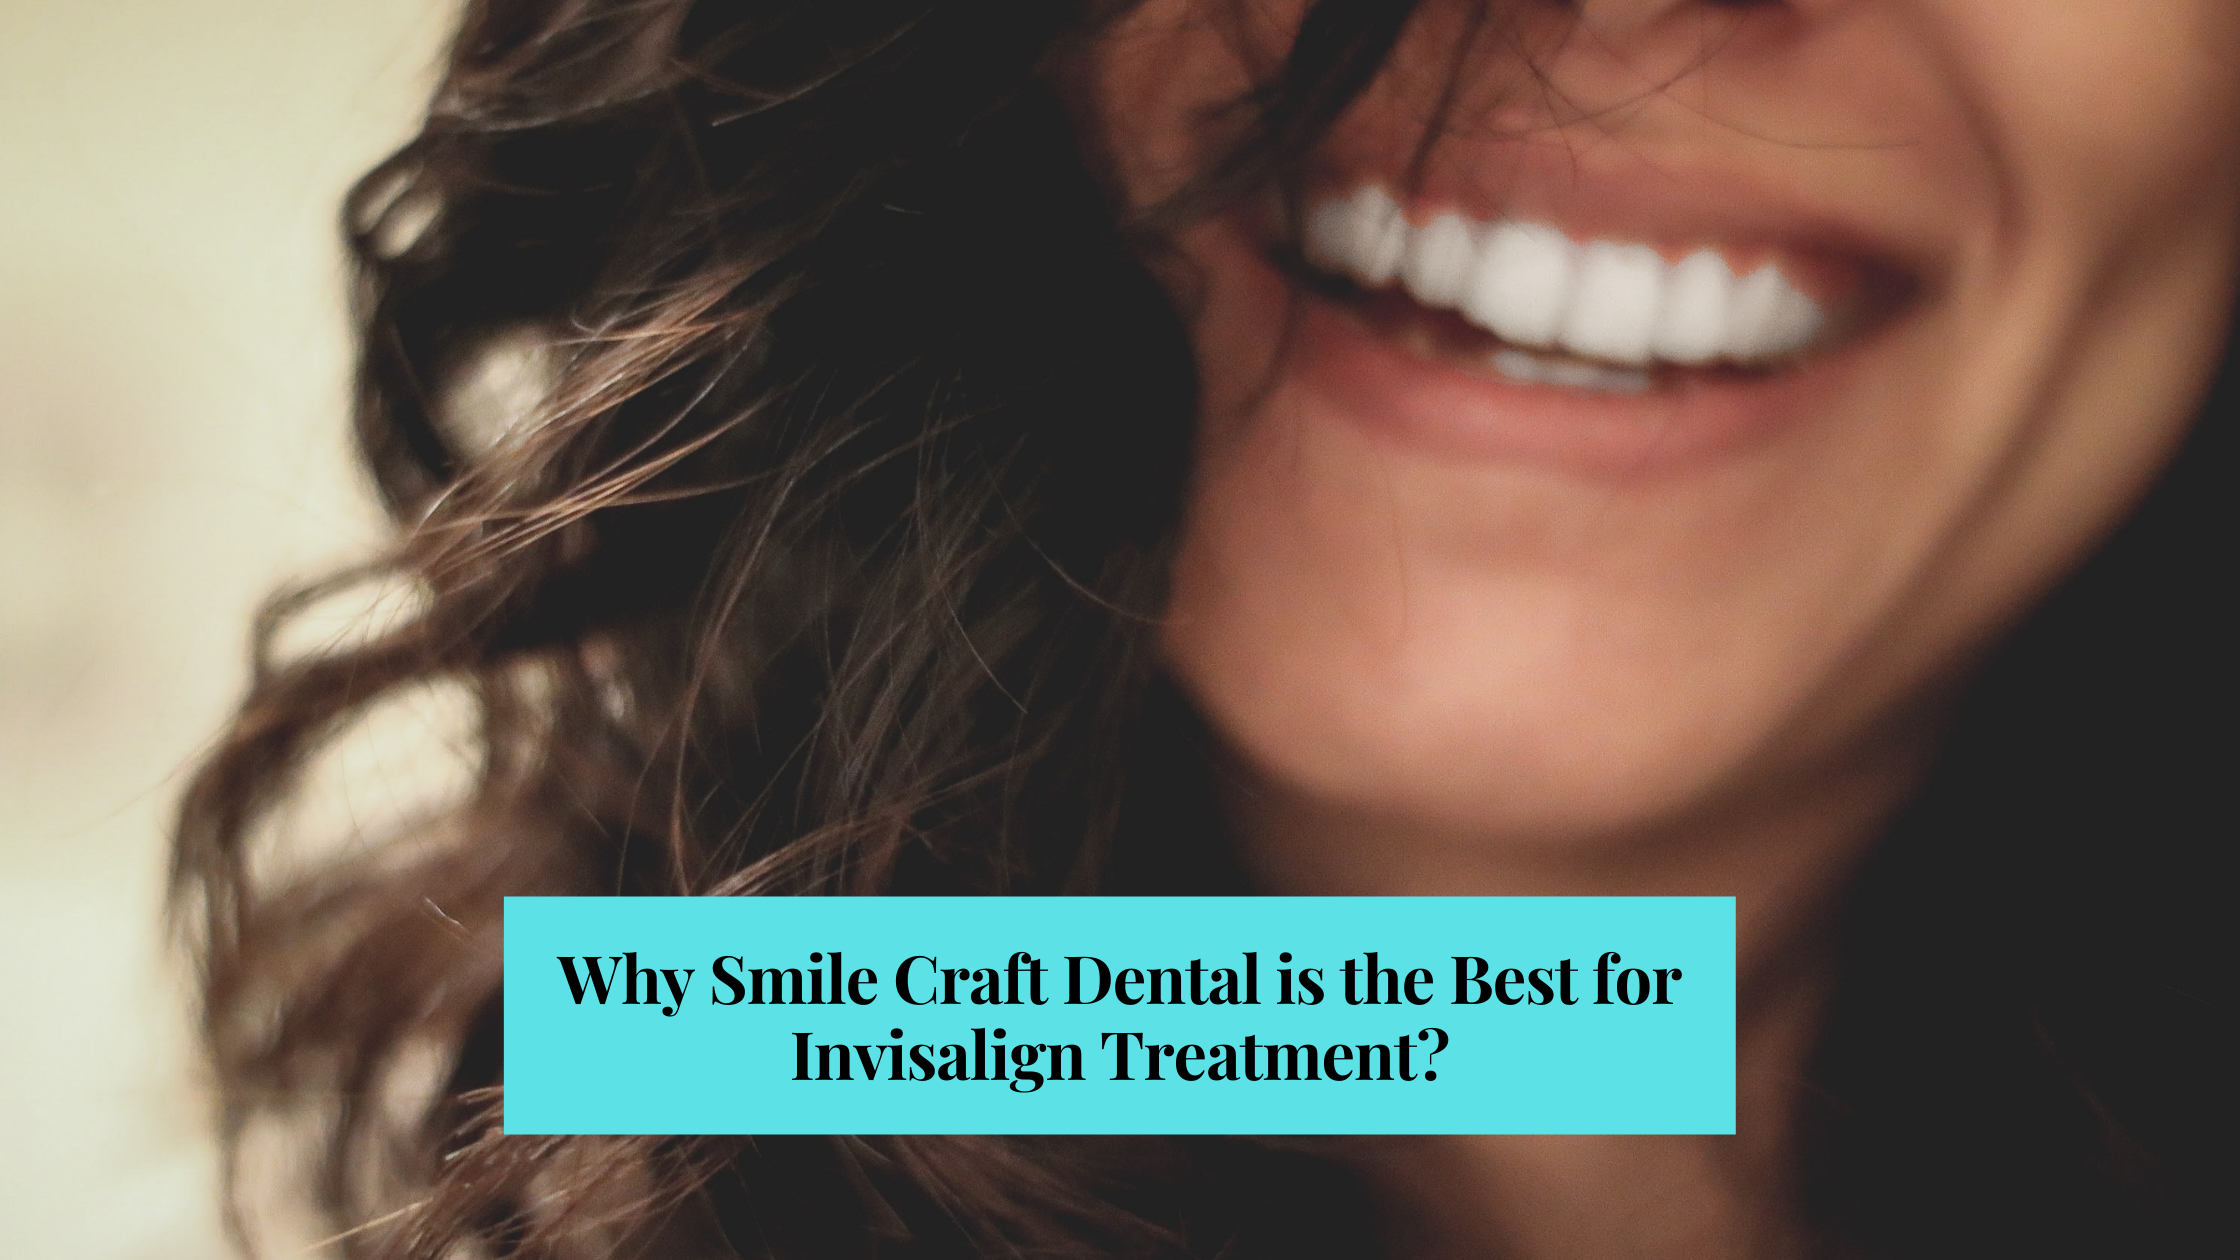 why smile craft dental is best in invisalign treatment